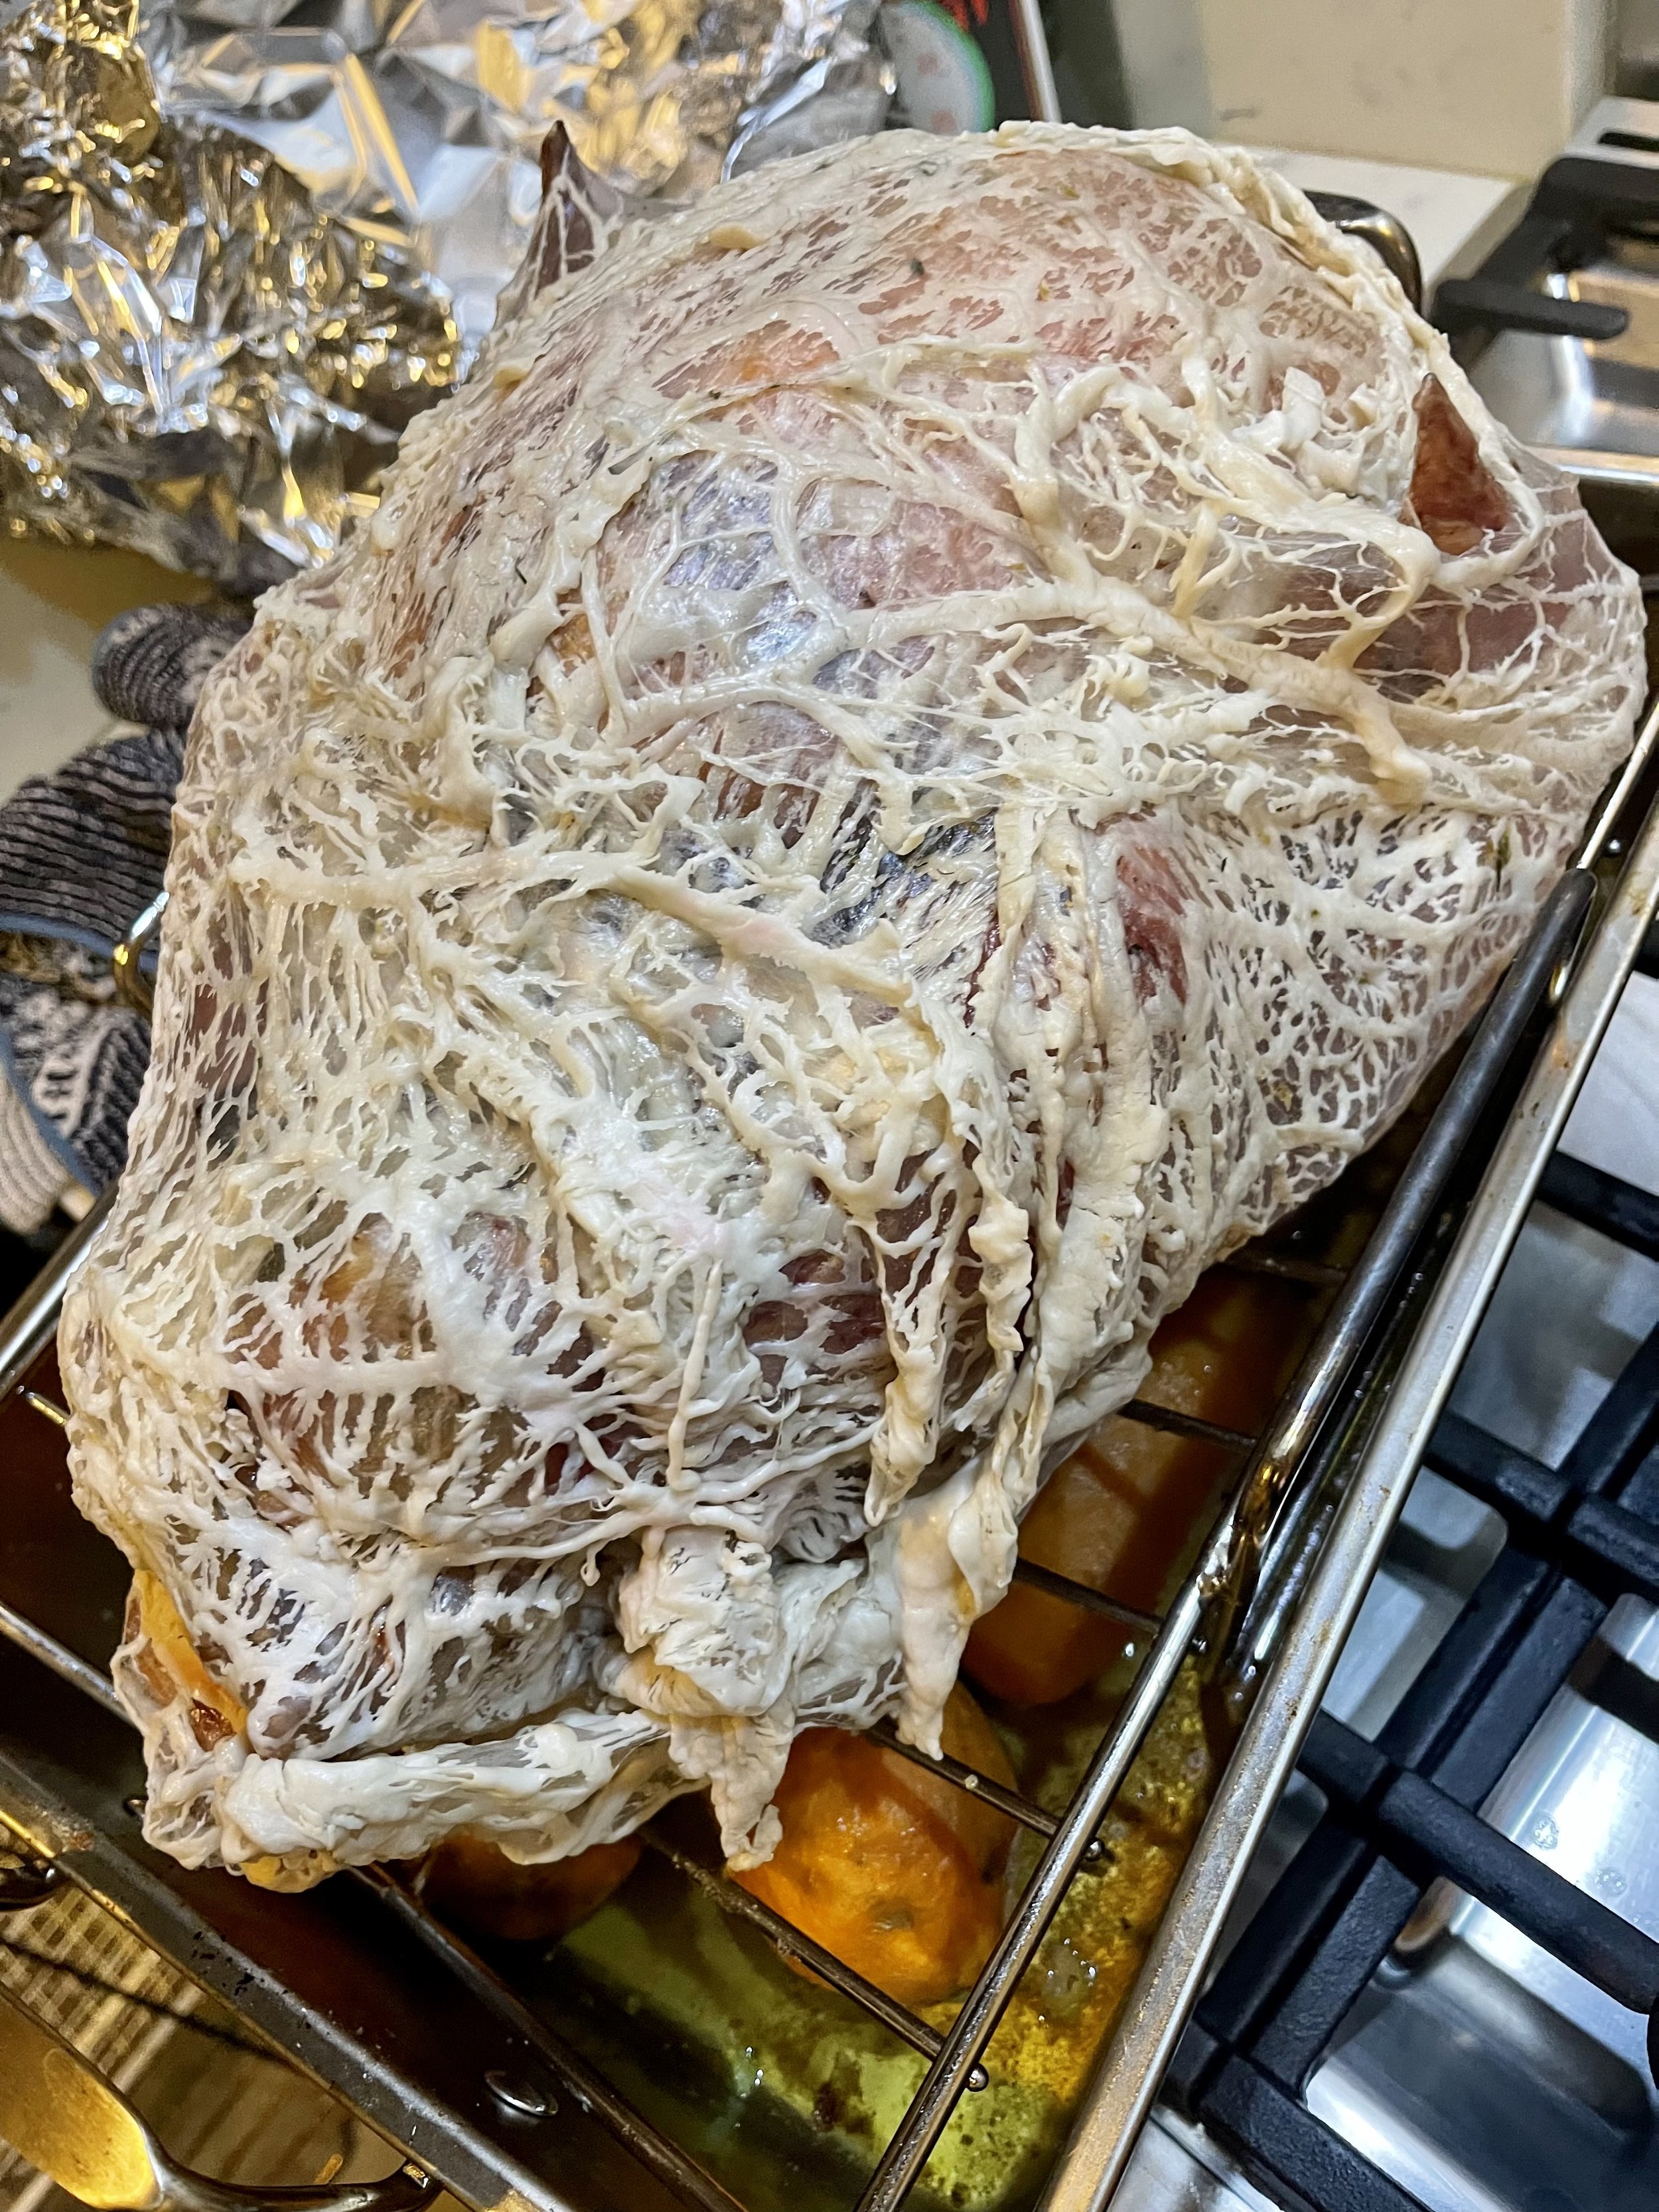 Turkey covered with caul fat